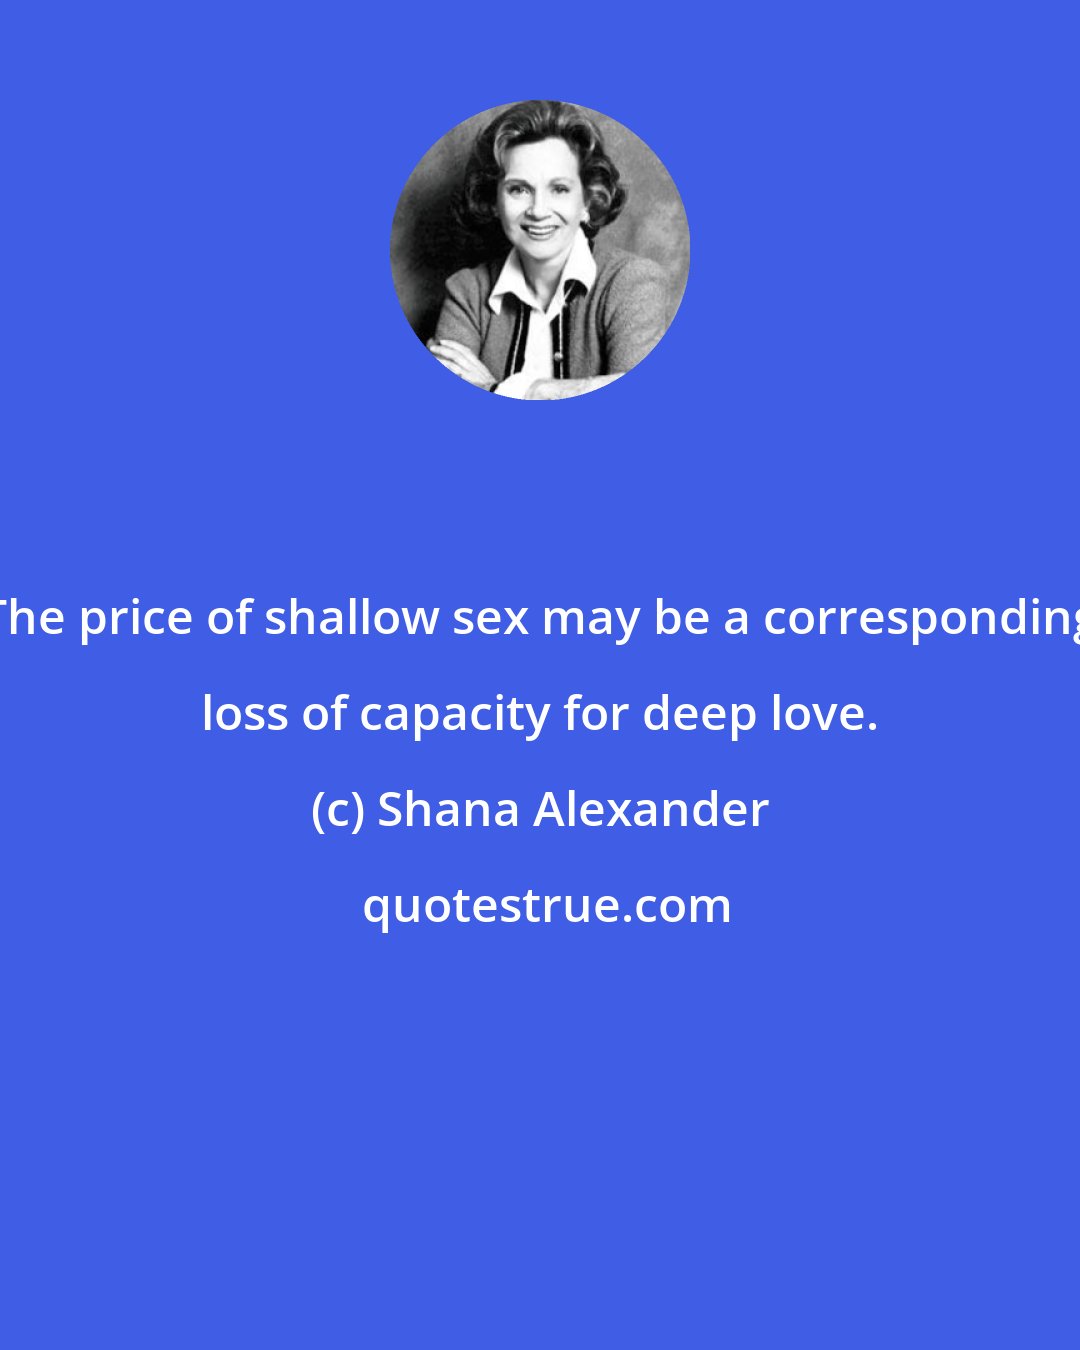 Shana Alexander: The price of shallow sex may be a corresponding loss of capacity for deep love.